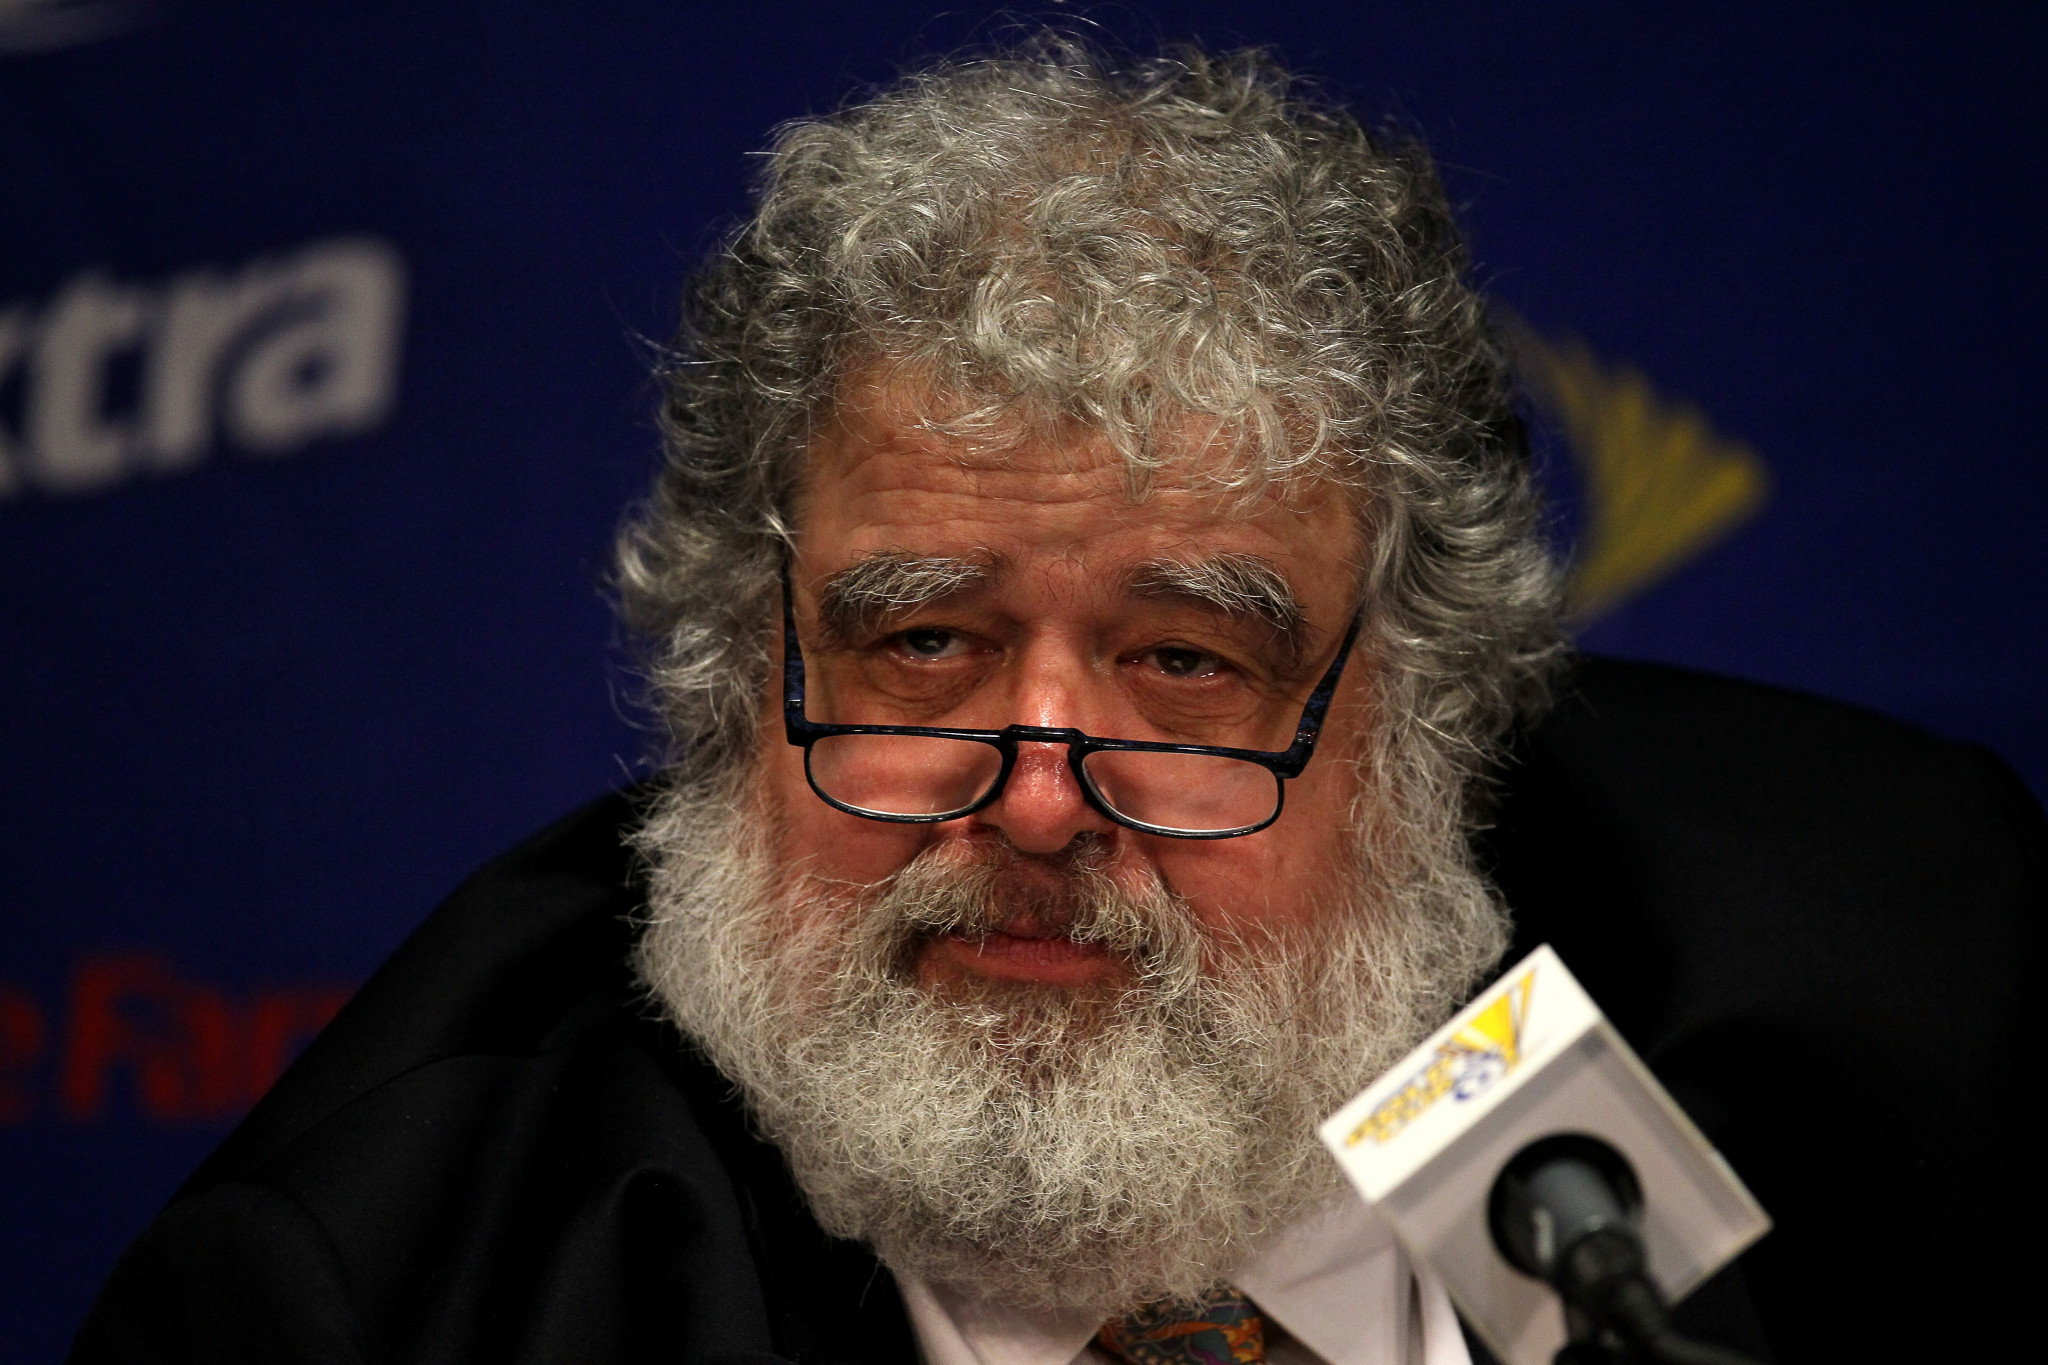 Chuck Blazer, who has now passed away, was a central figure in the corruption scandals ©Getty Images